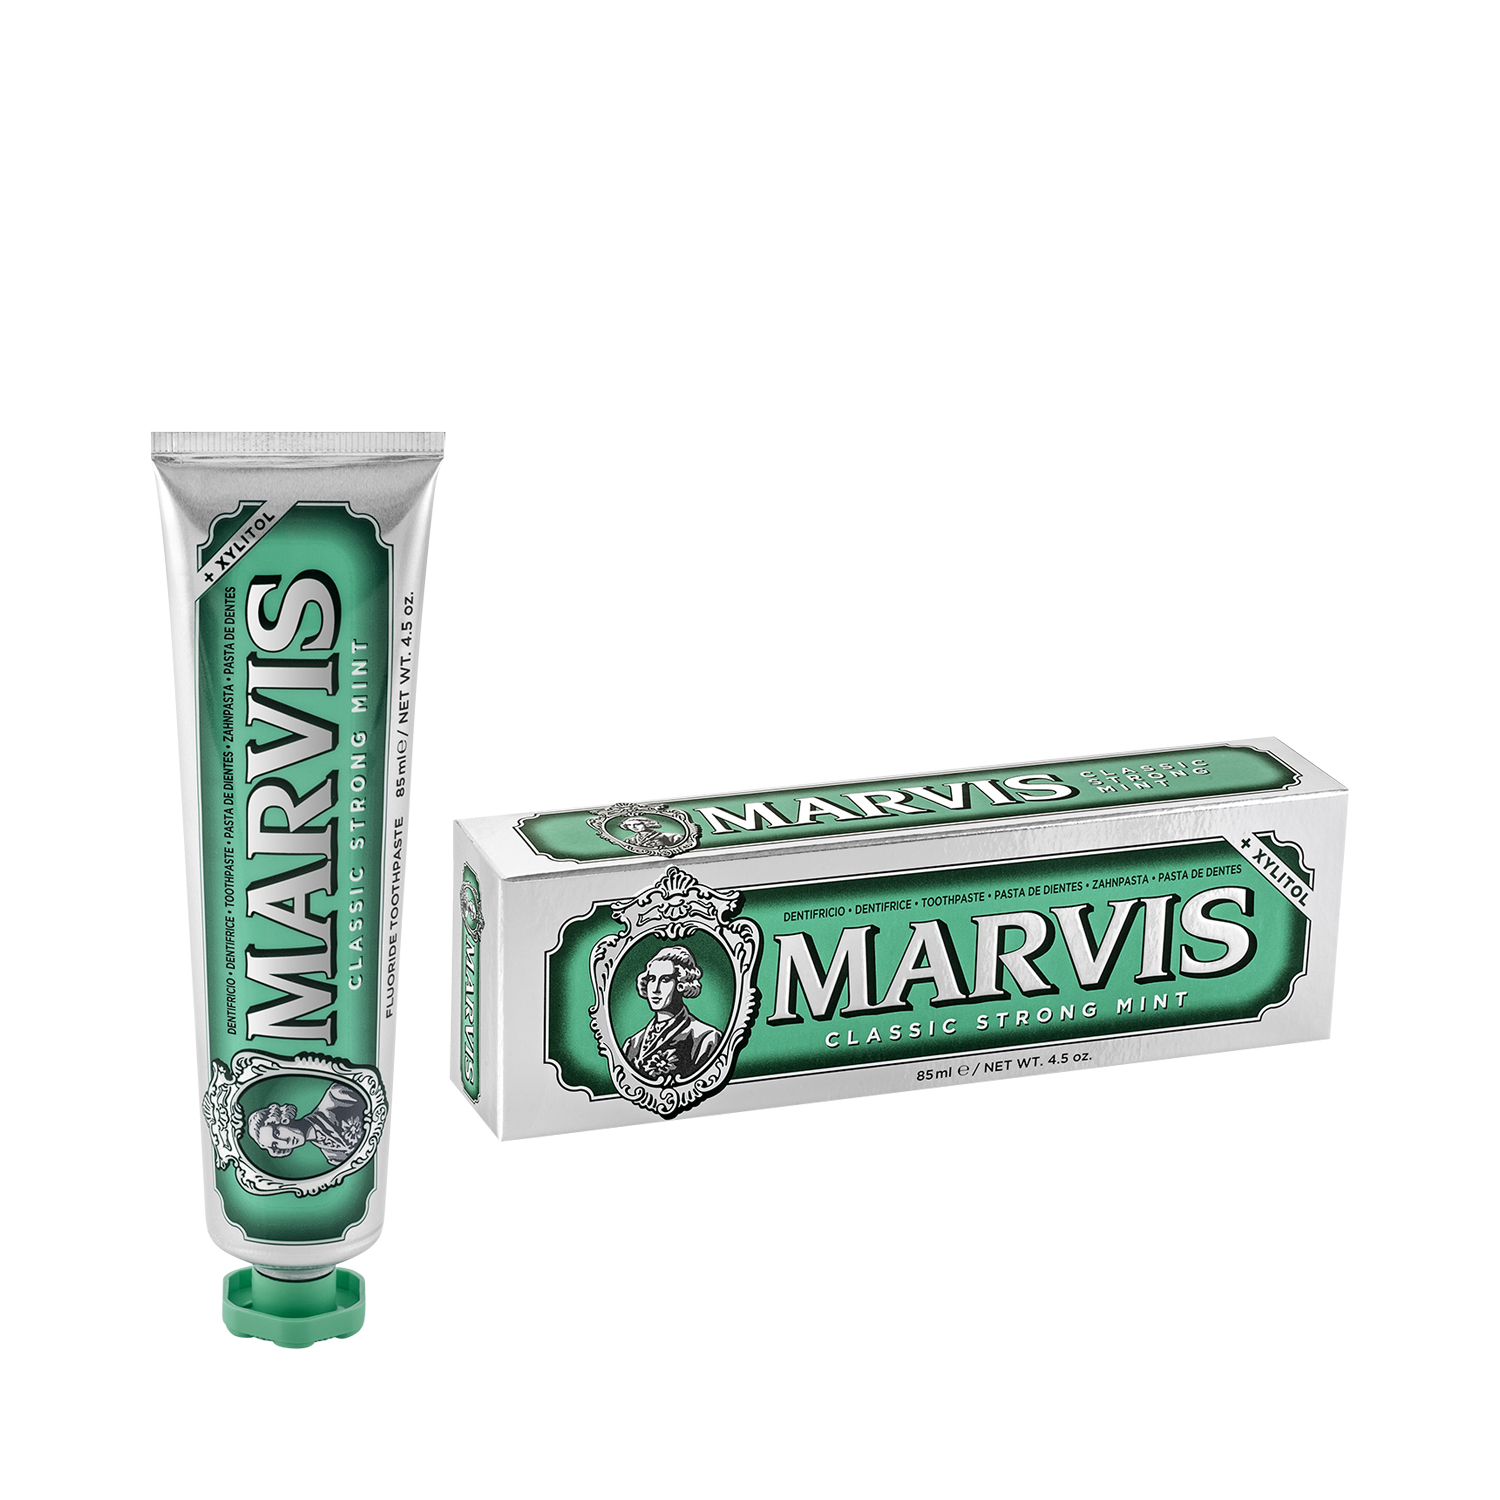 Marvis - Classic Strong Mint - Zahncreme